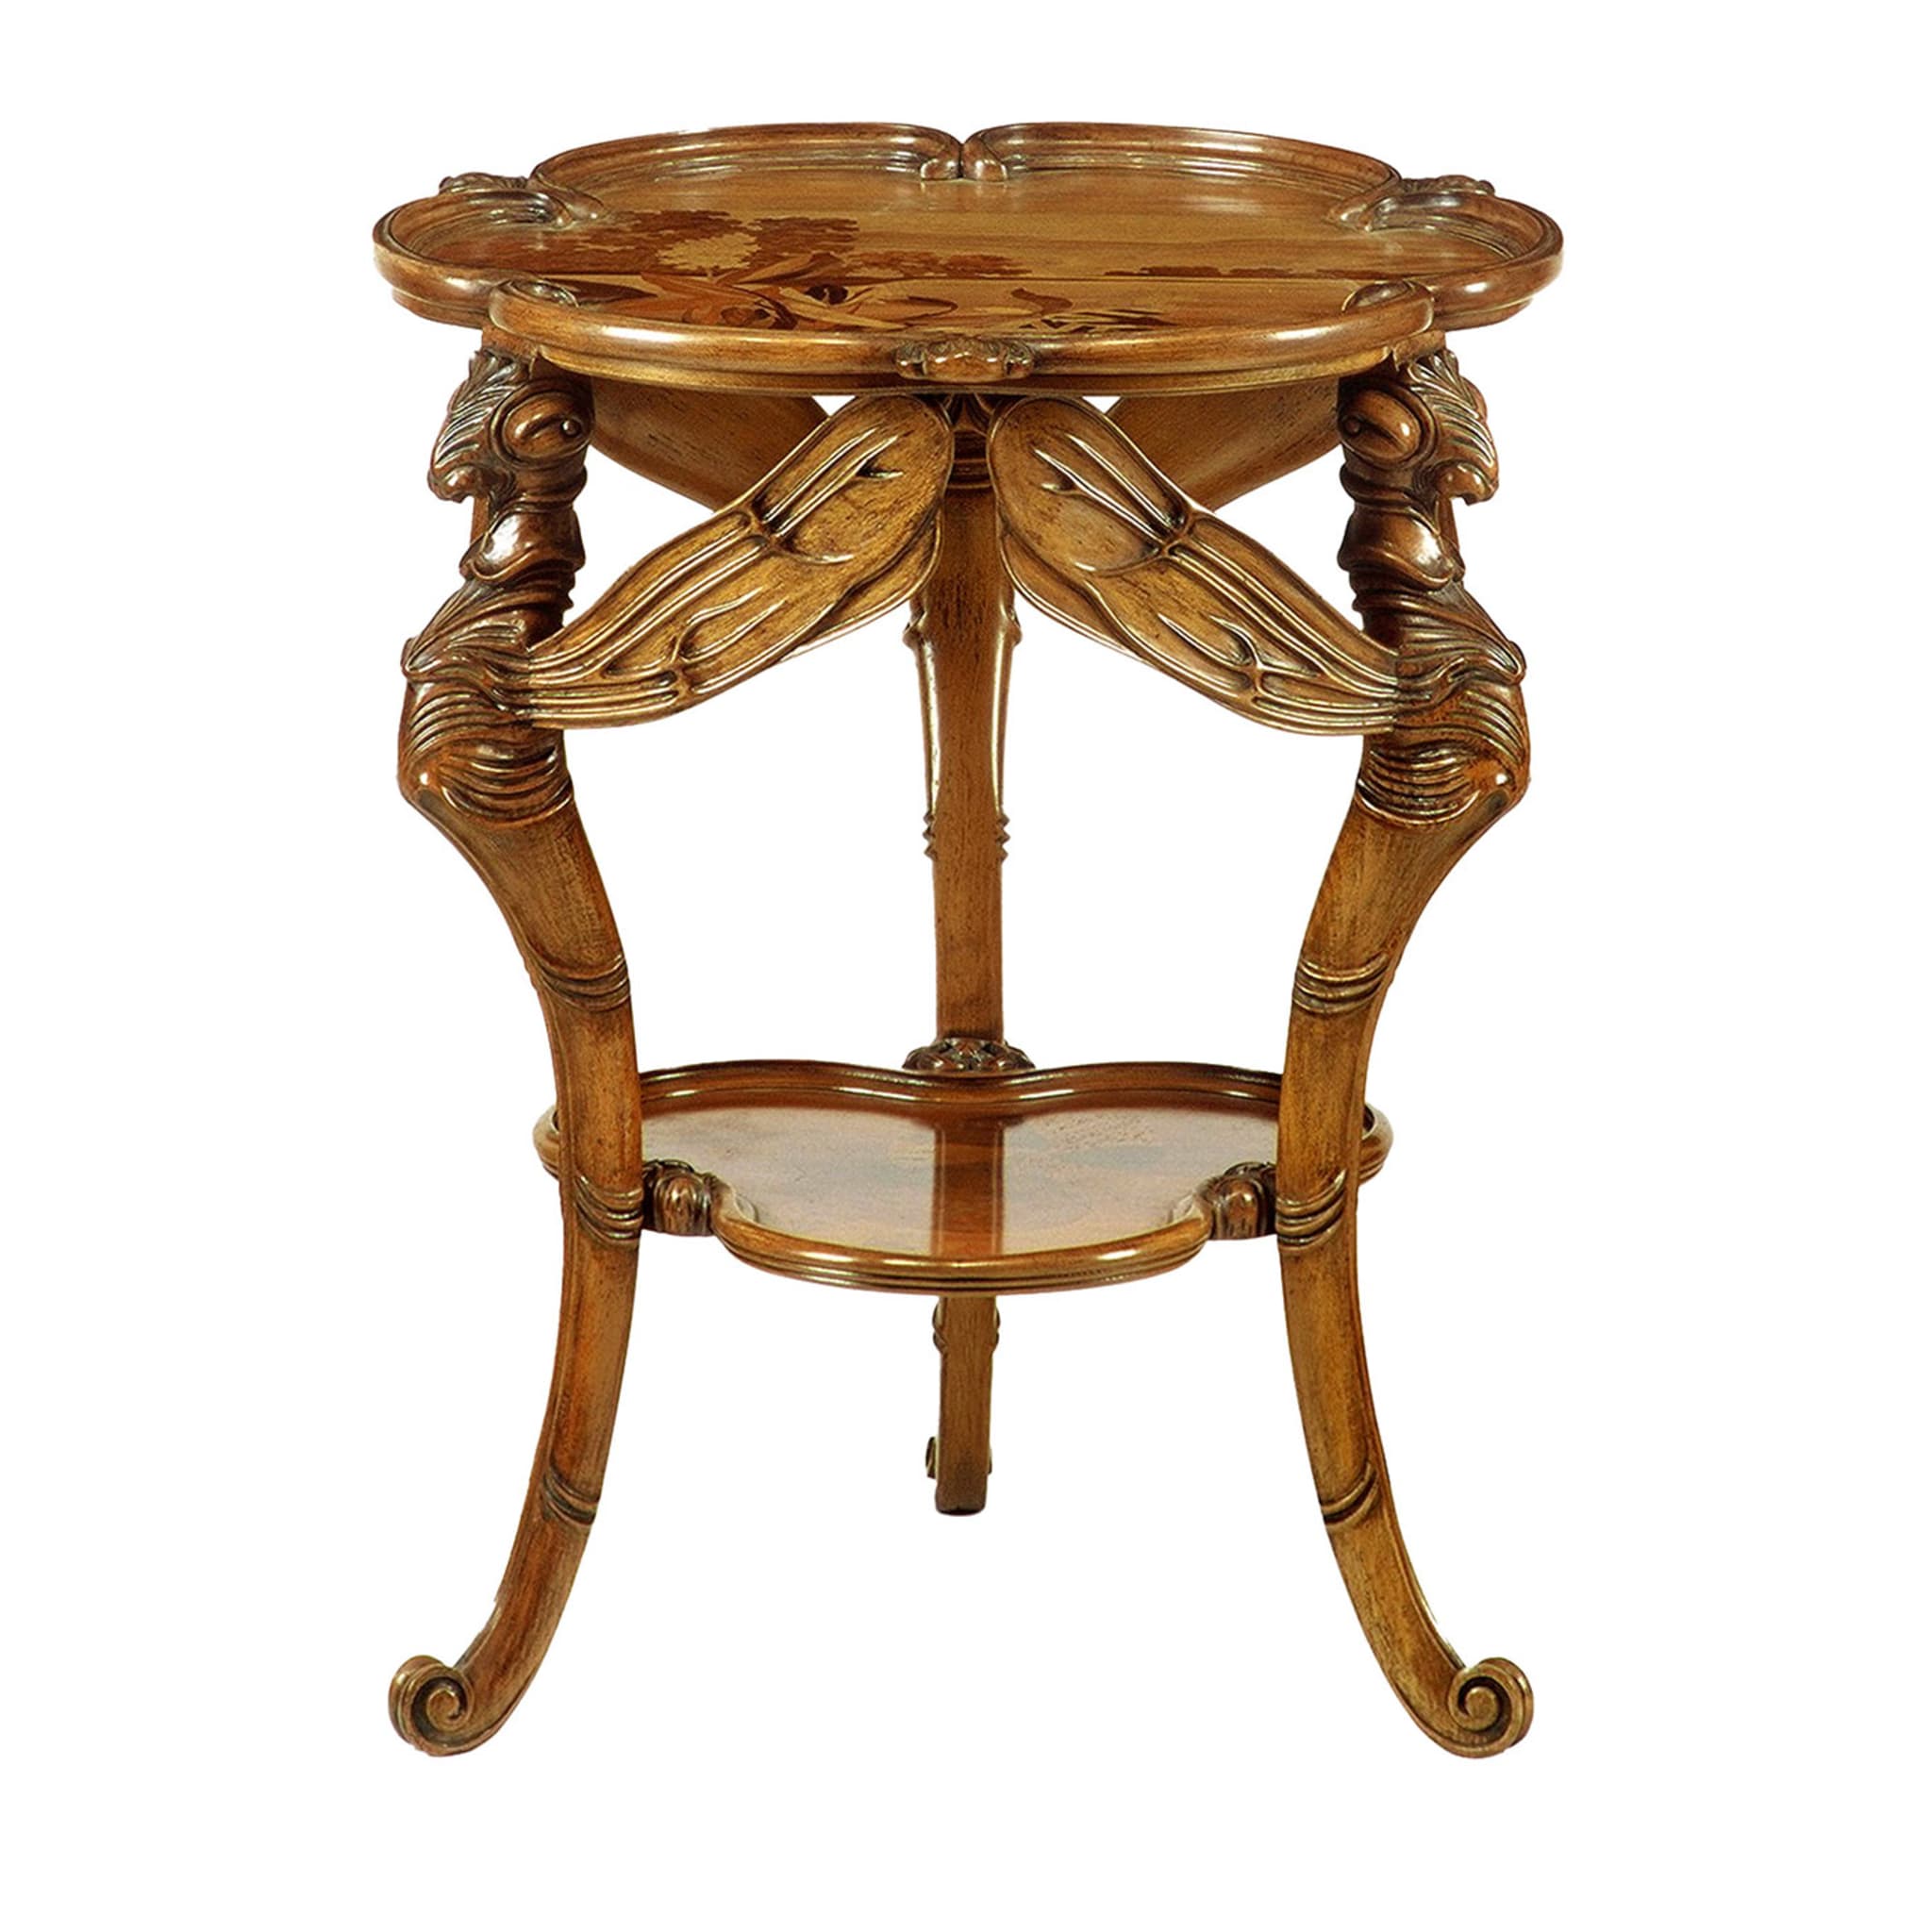 French Art Nouveau-Style Zoomorphic Side Table by Emile Gallè - Main view